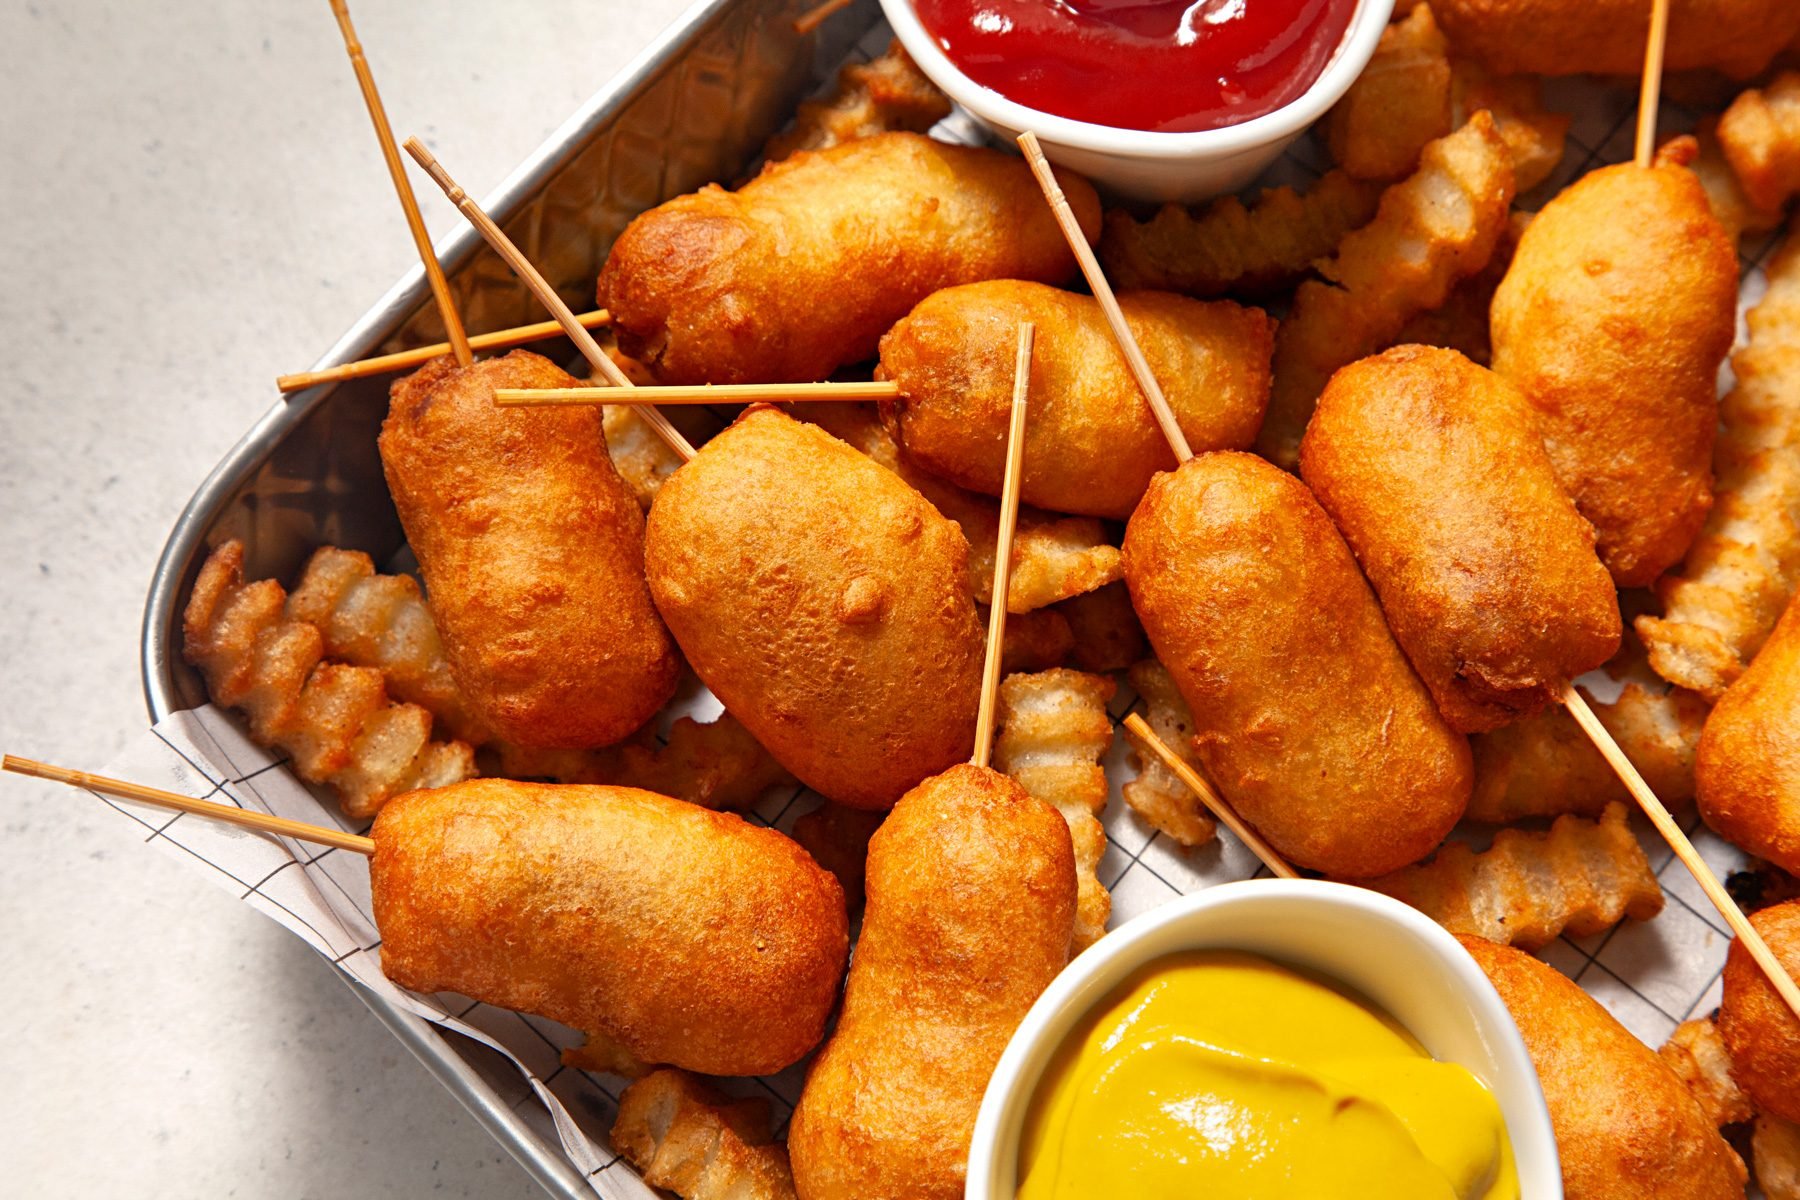 A tray of miniature corn dogs served with sauce